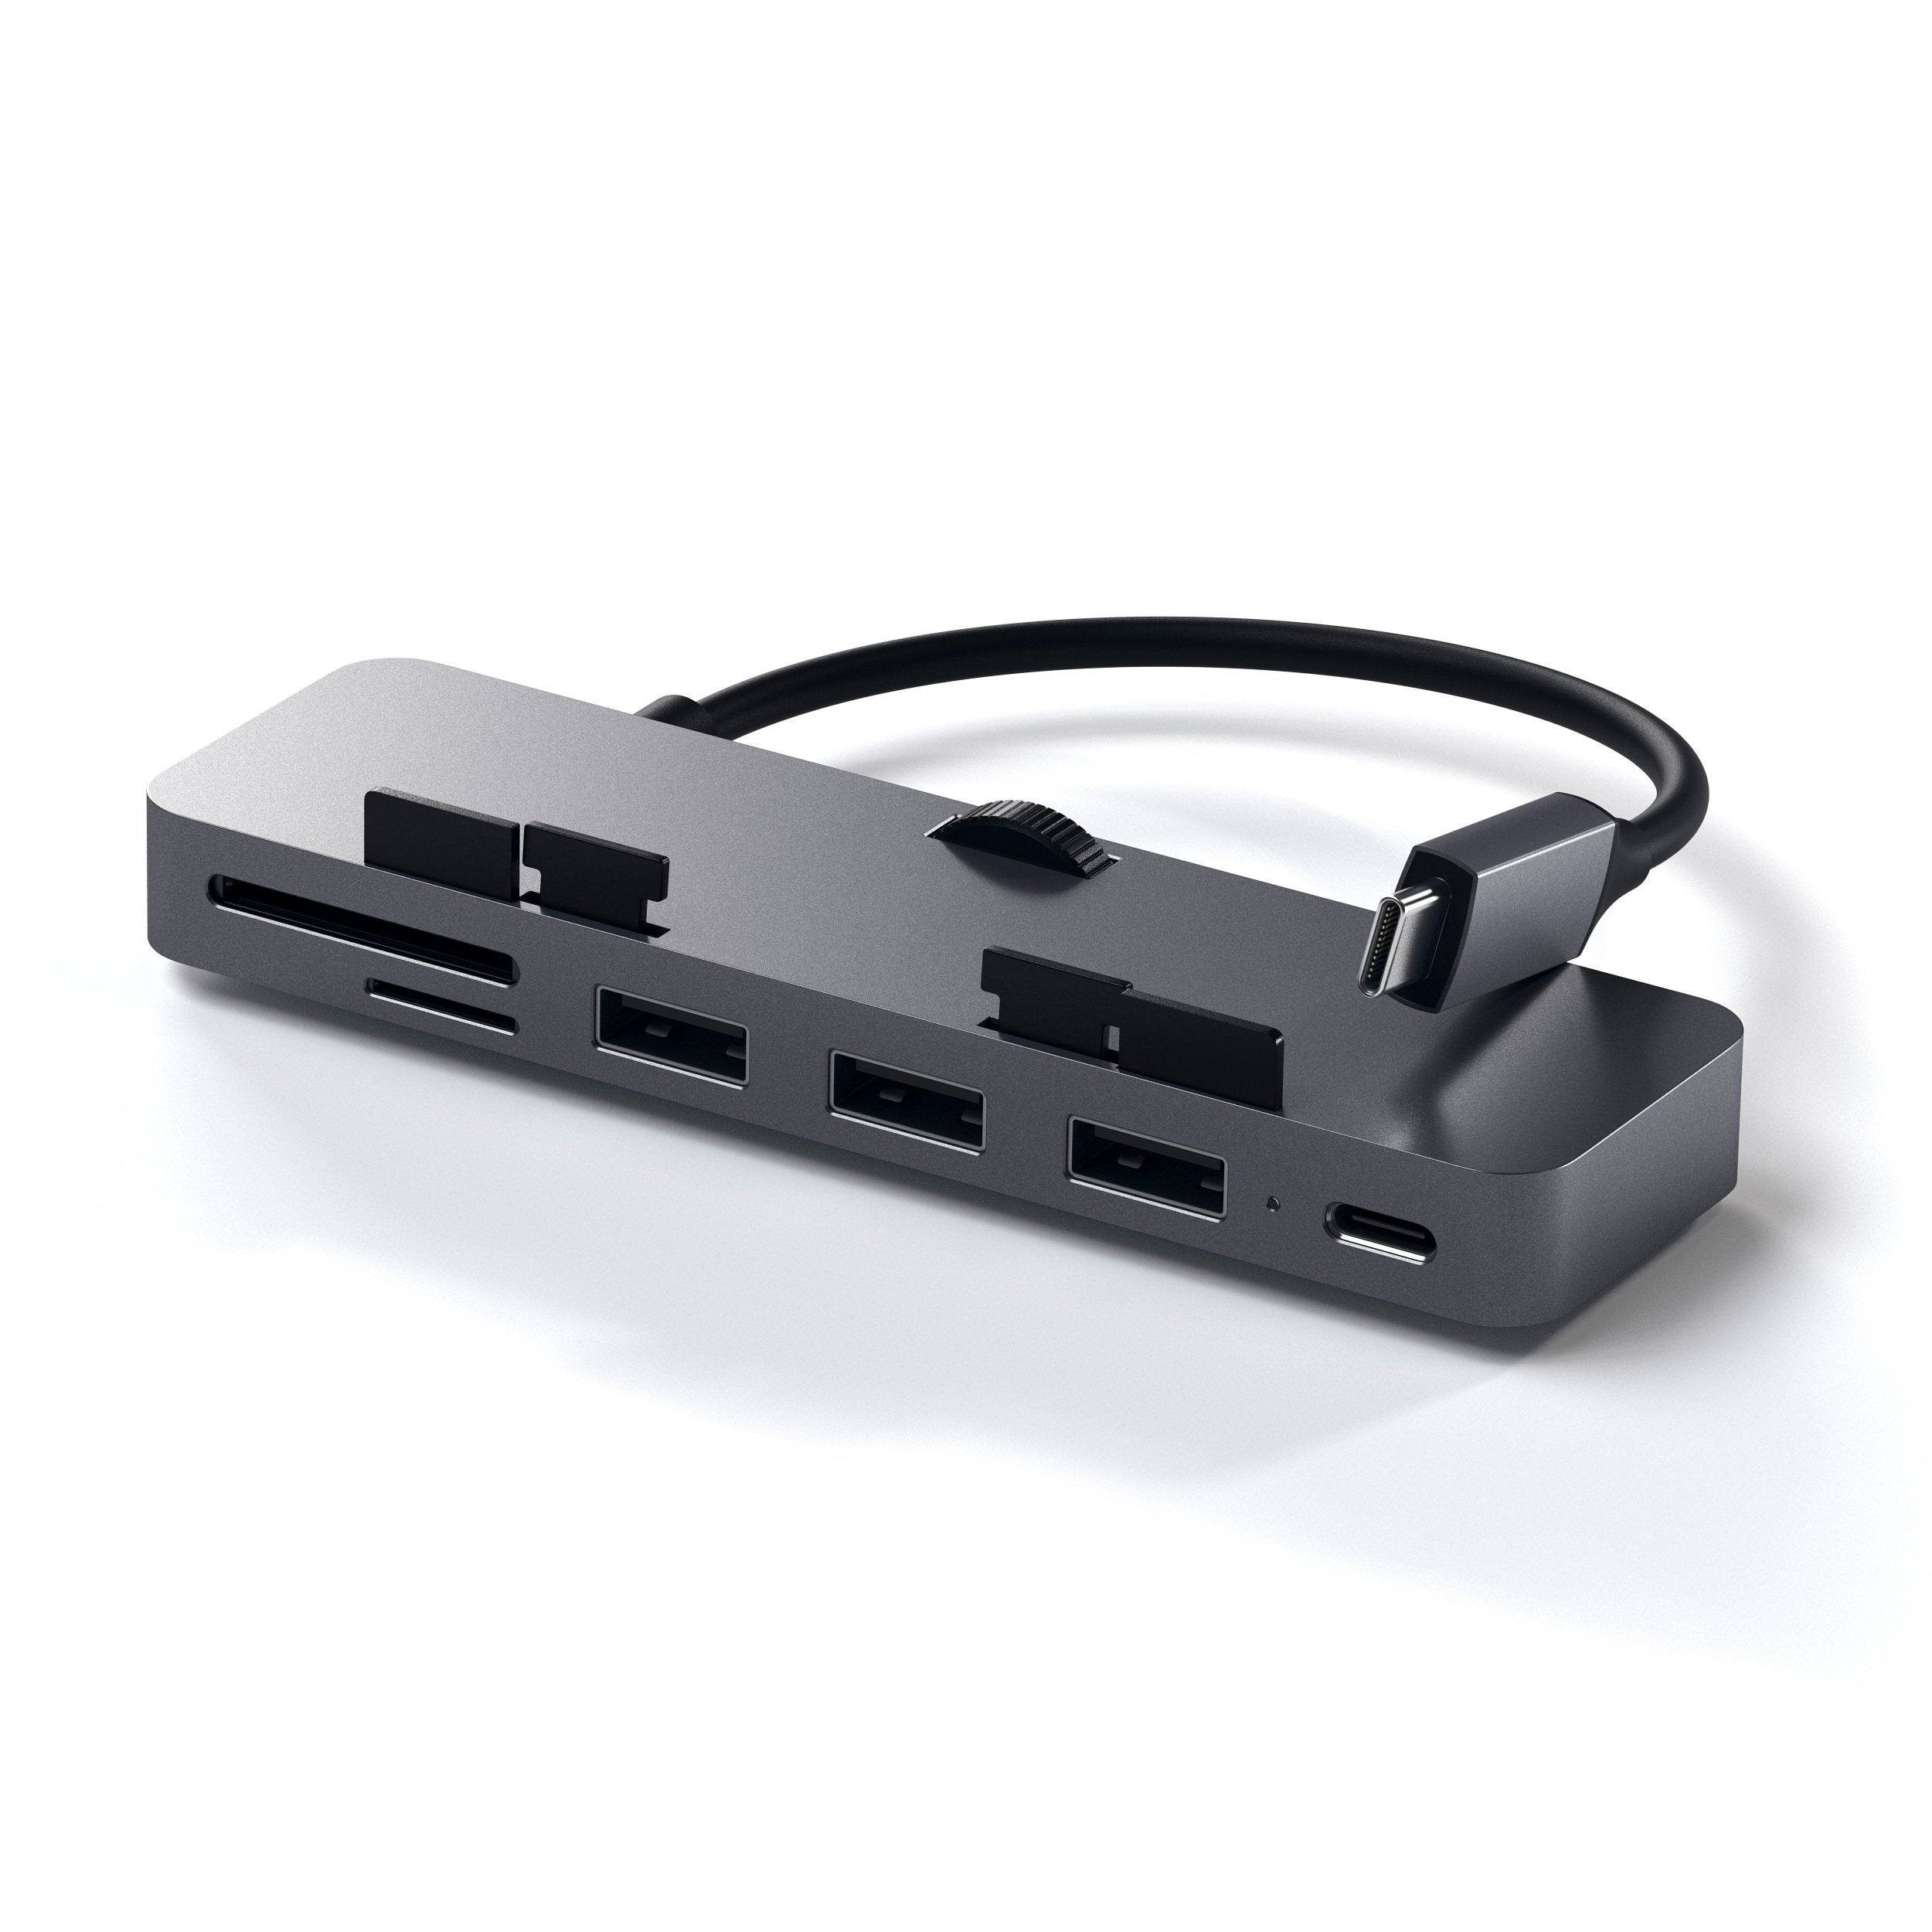 Satechi USB-C Clamp Hub for 24in Apple iMac (ST-UCICHS) - Moment